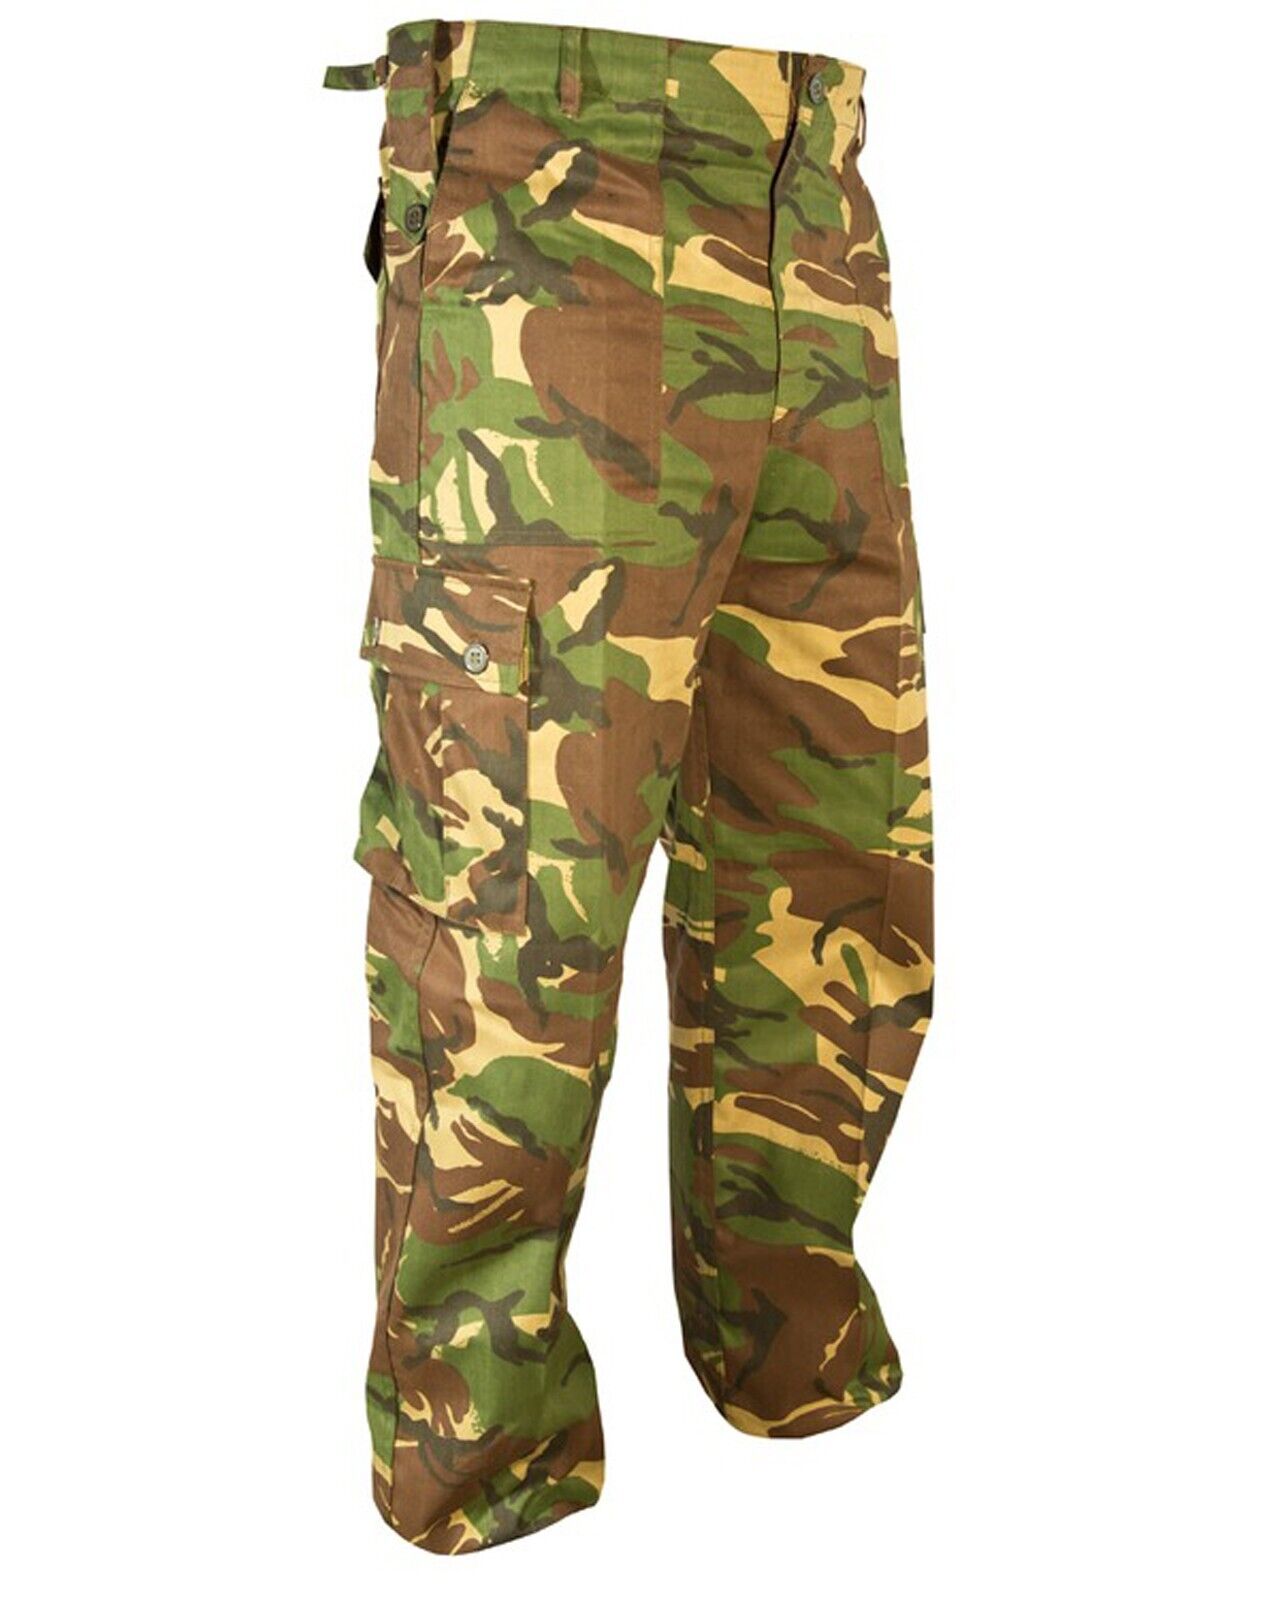 Men DPM Army Trousers Military Combat Cargo Camo Camouflage Pants Airsoft Work